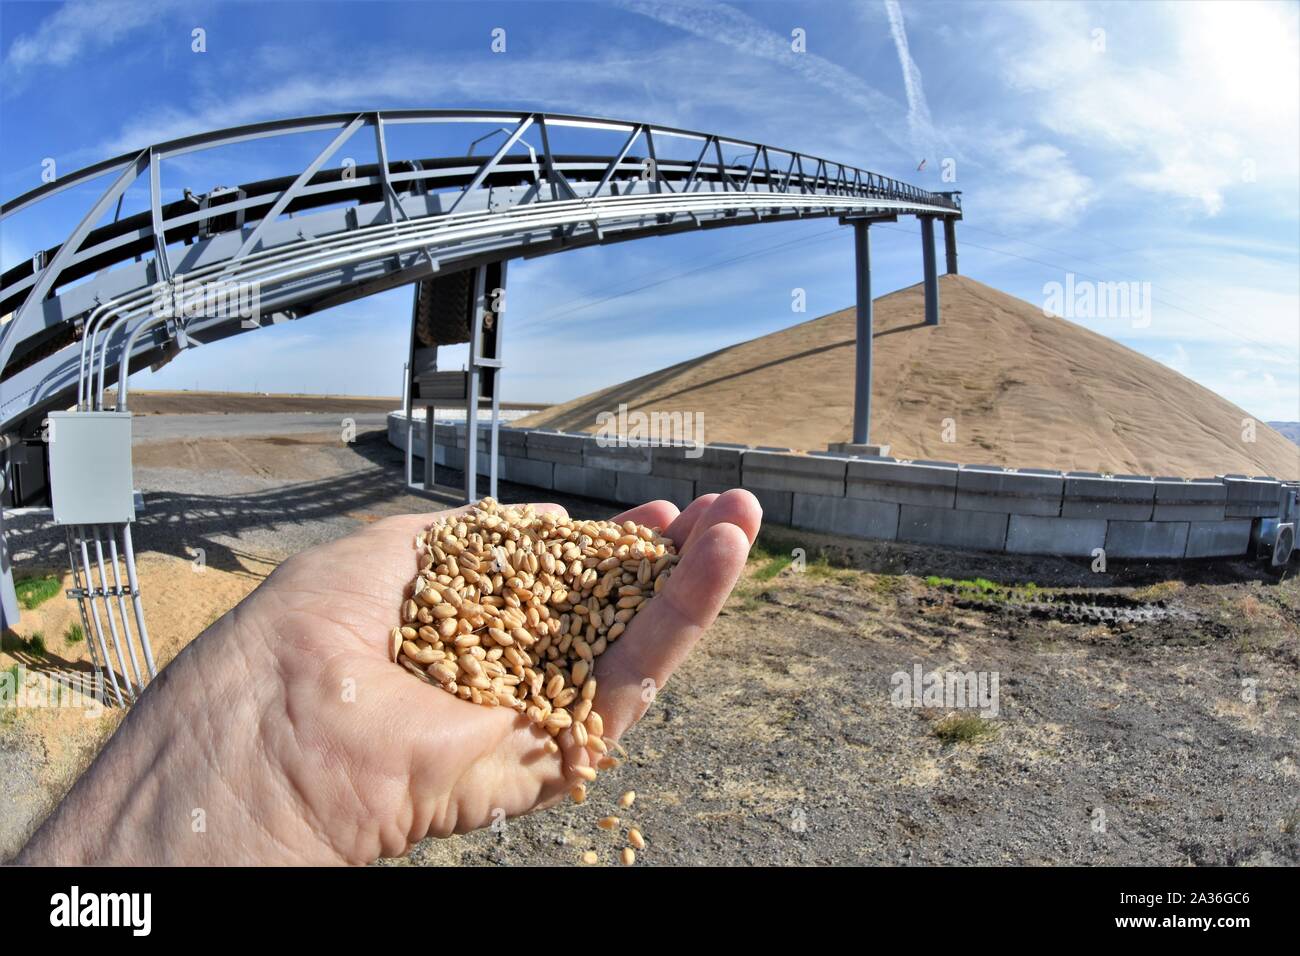 Over supply of wheat after tariff battle with China stored on the ground in South Eastern Washington state due to Trumps price war with export taxes Stock Photo